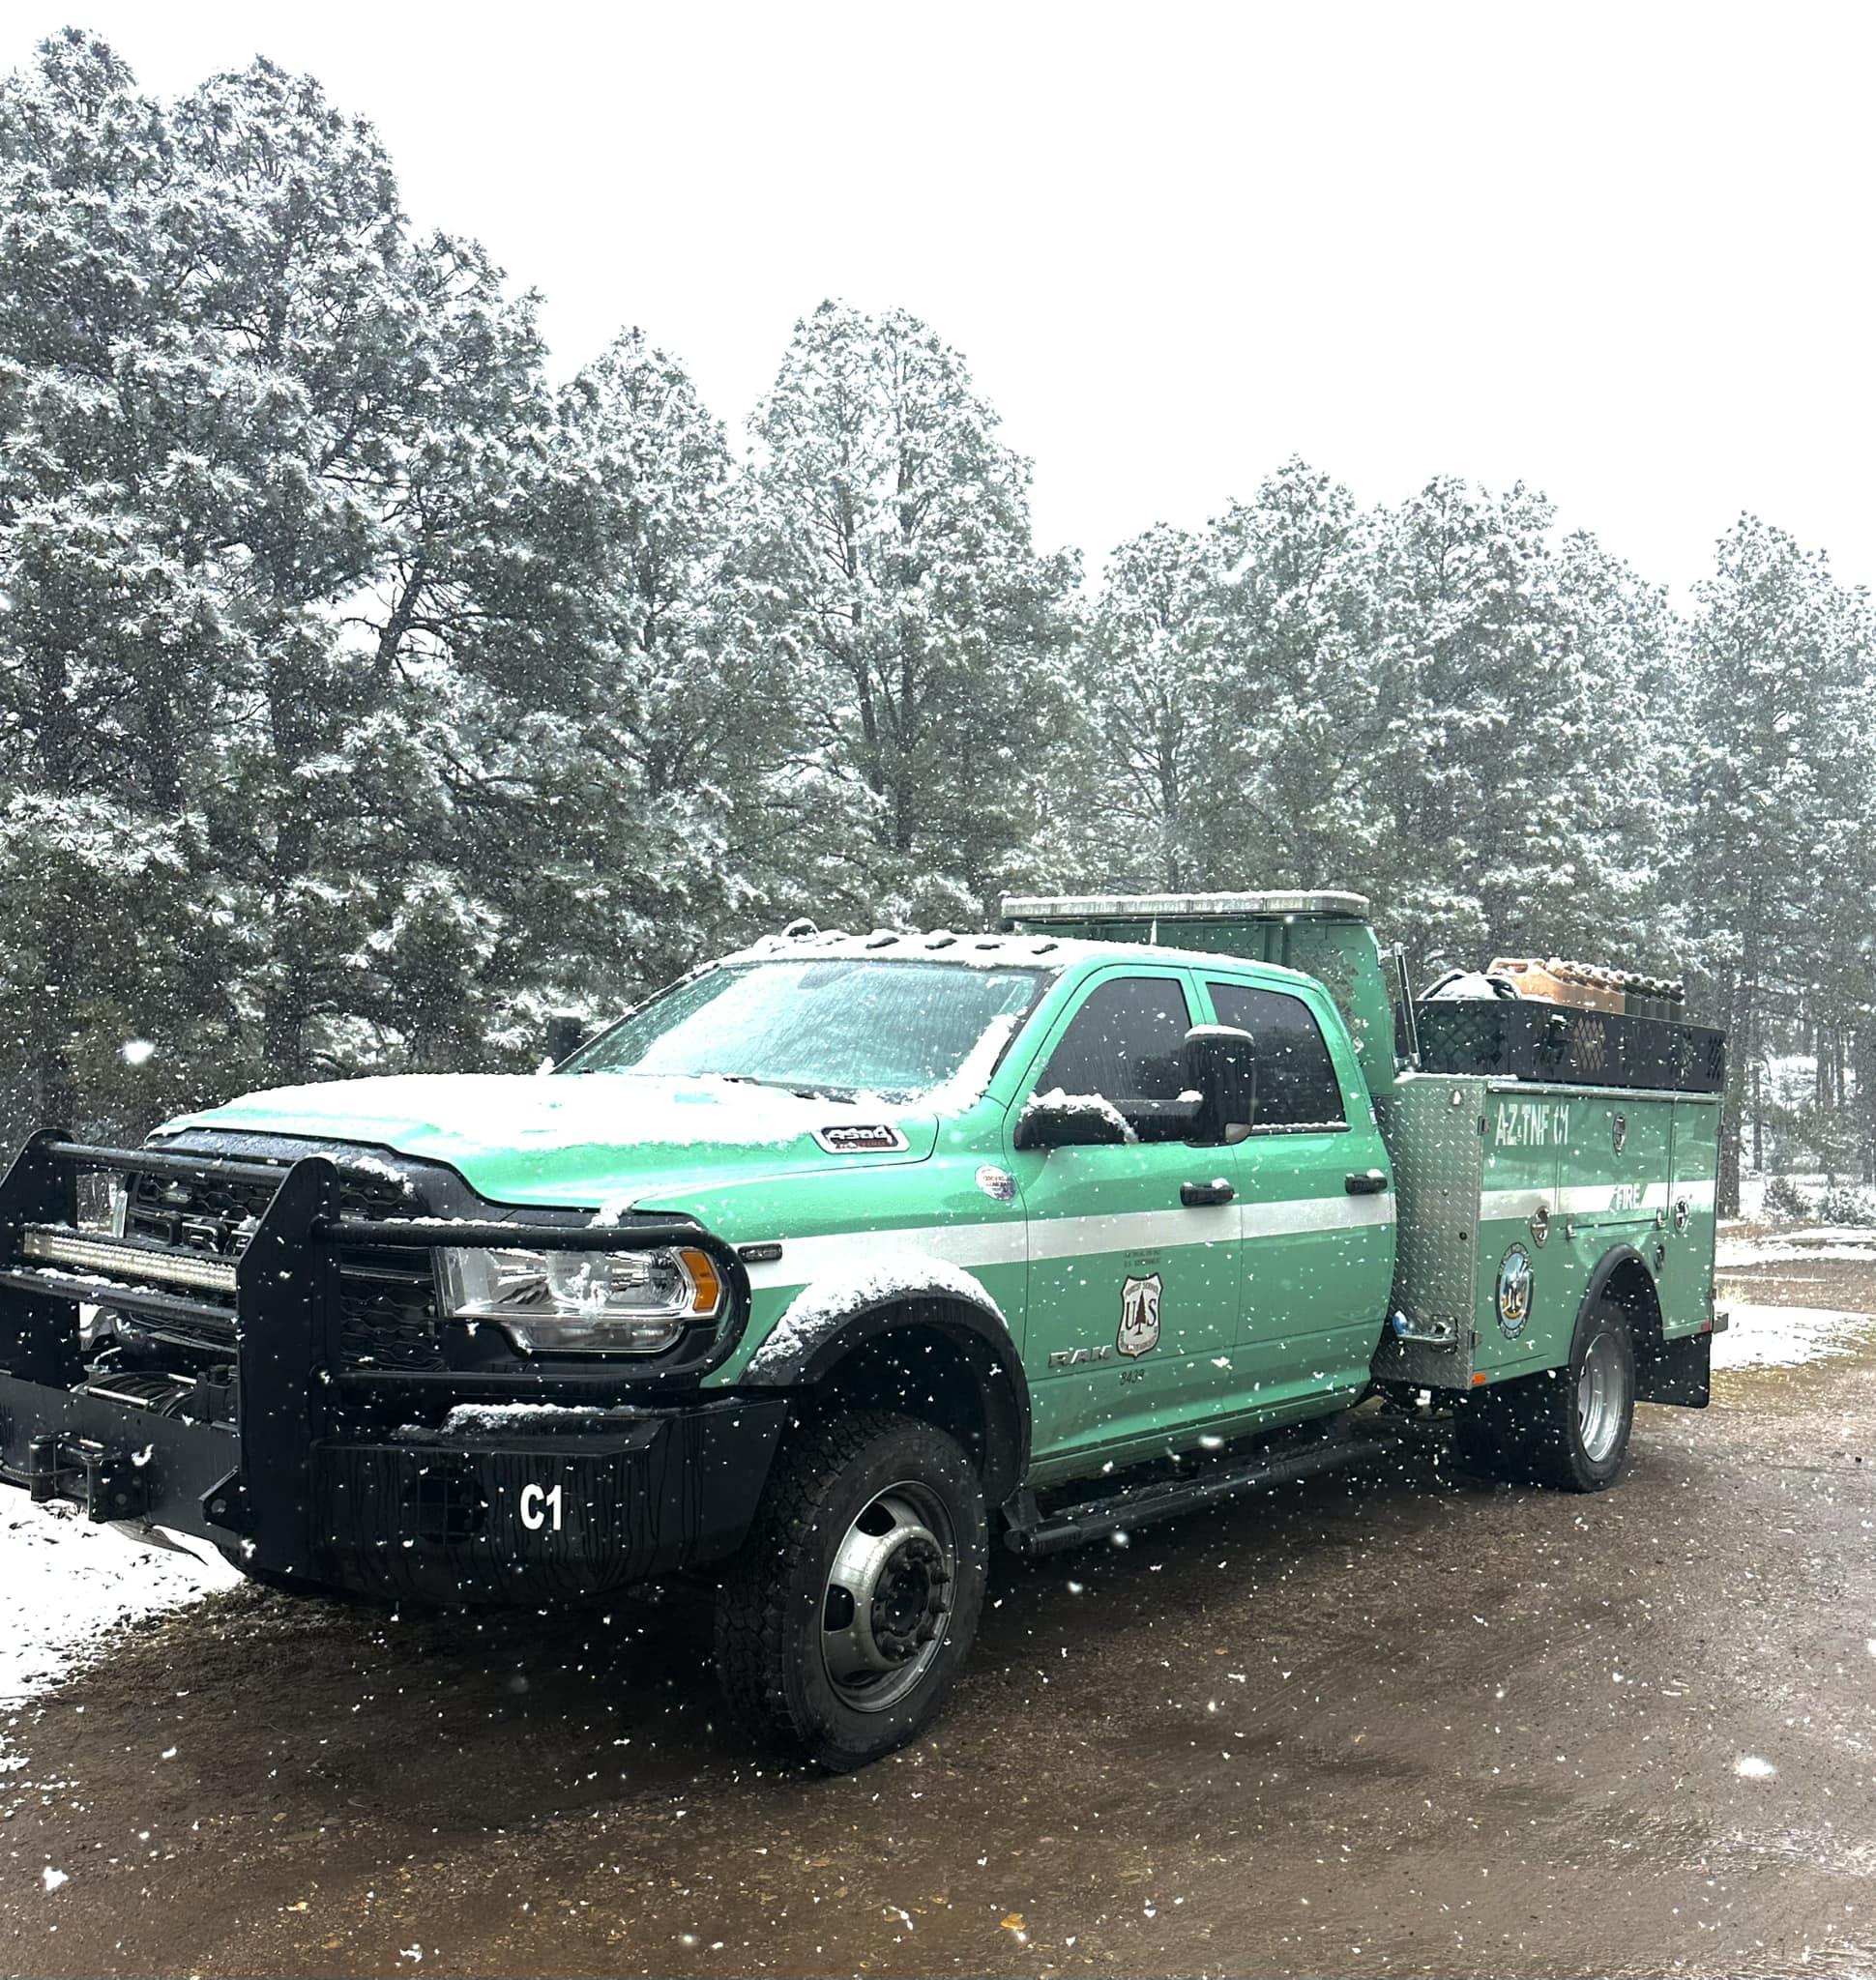 Snowfall landing around a Hotshot vehicle on the Lincoln National Forest